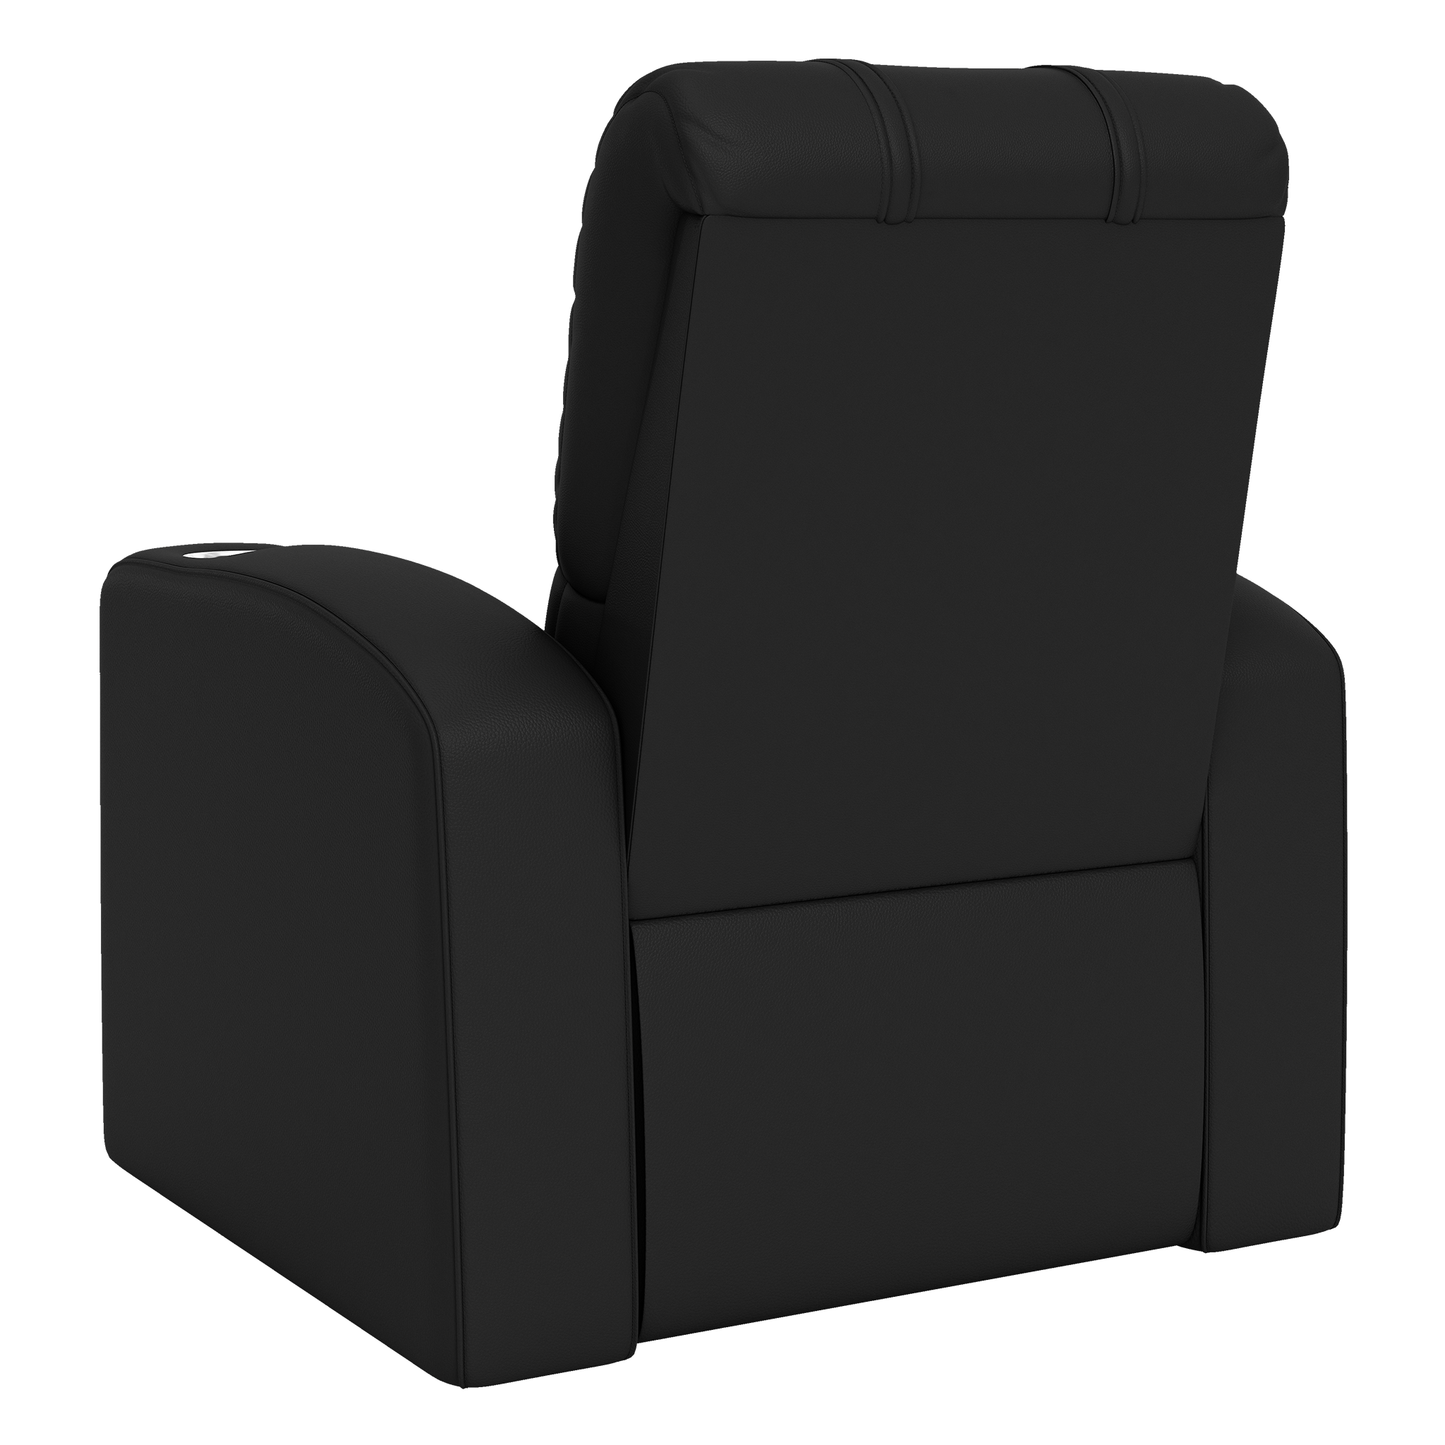 Relax Home Theater Recliner with Charlotte FC Crown Logo